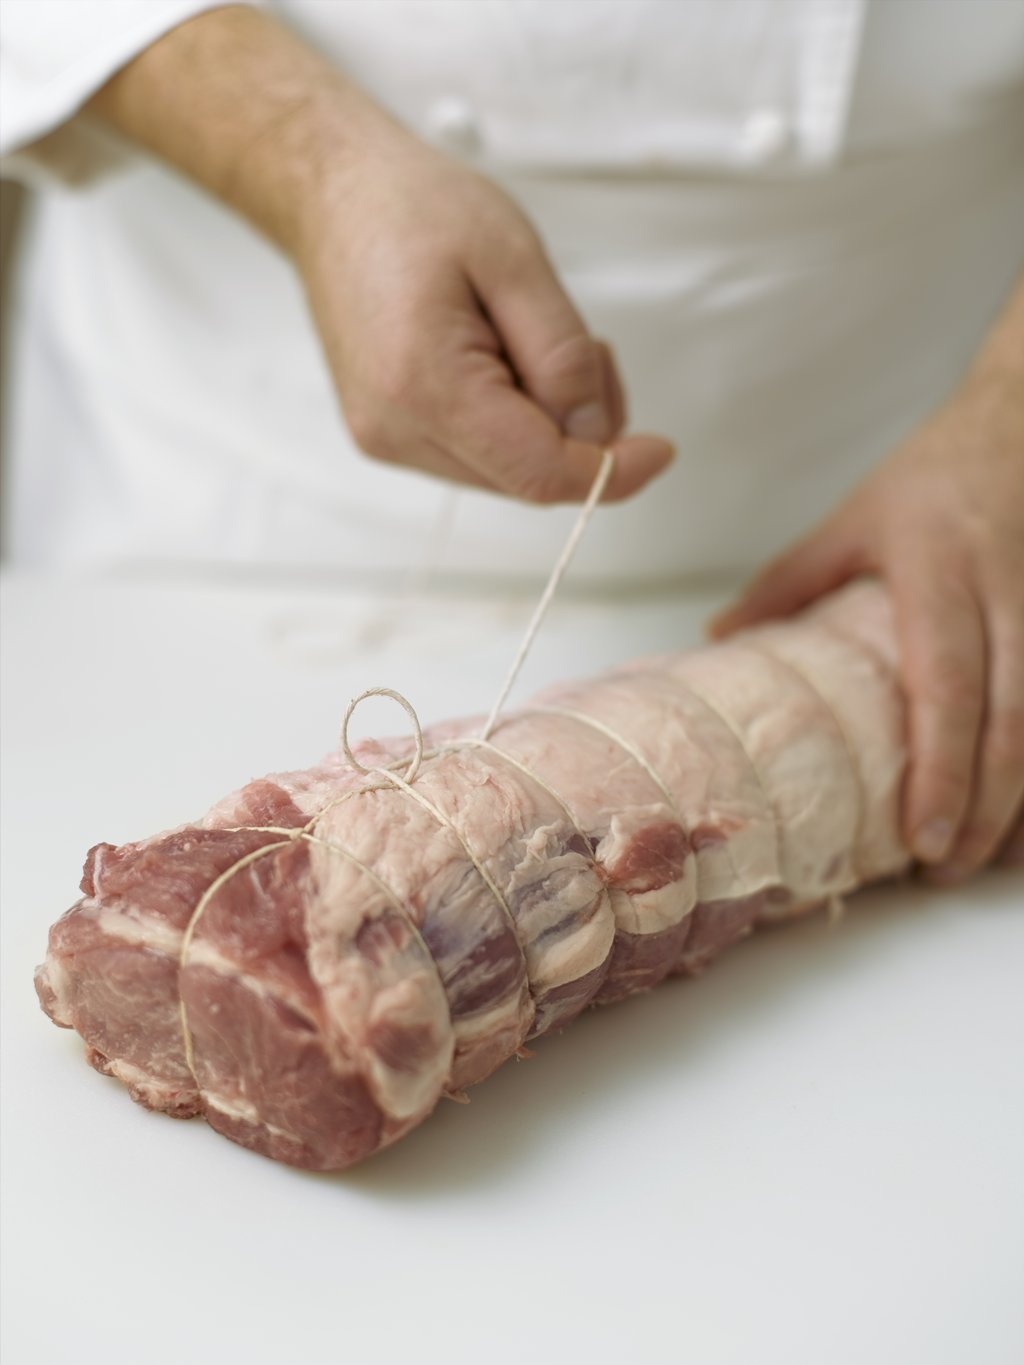 Step six: Turn the piece of meat over. Pass the loose end of the string through the loop, then pass it back around and underneath the loop. Pull the string tight and continue down the length of the meat.